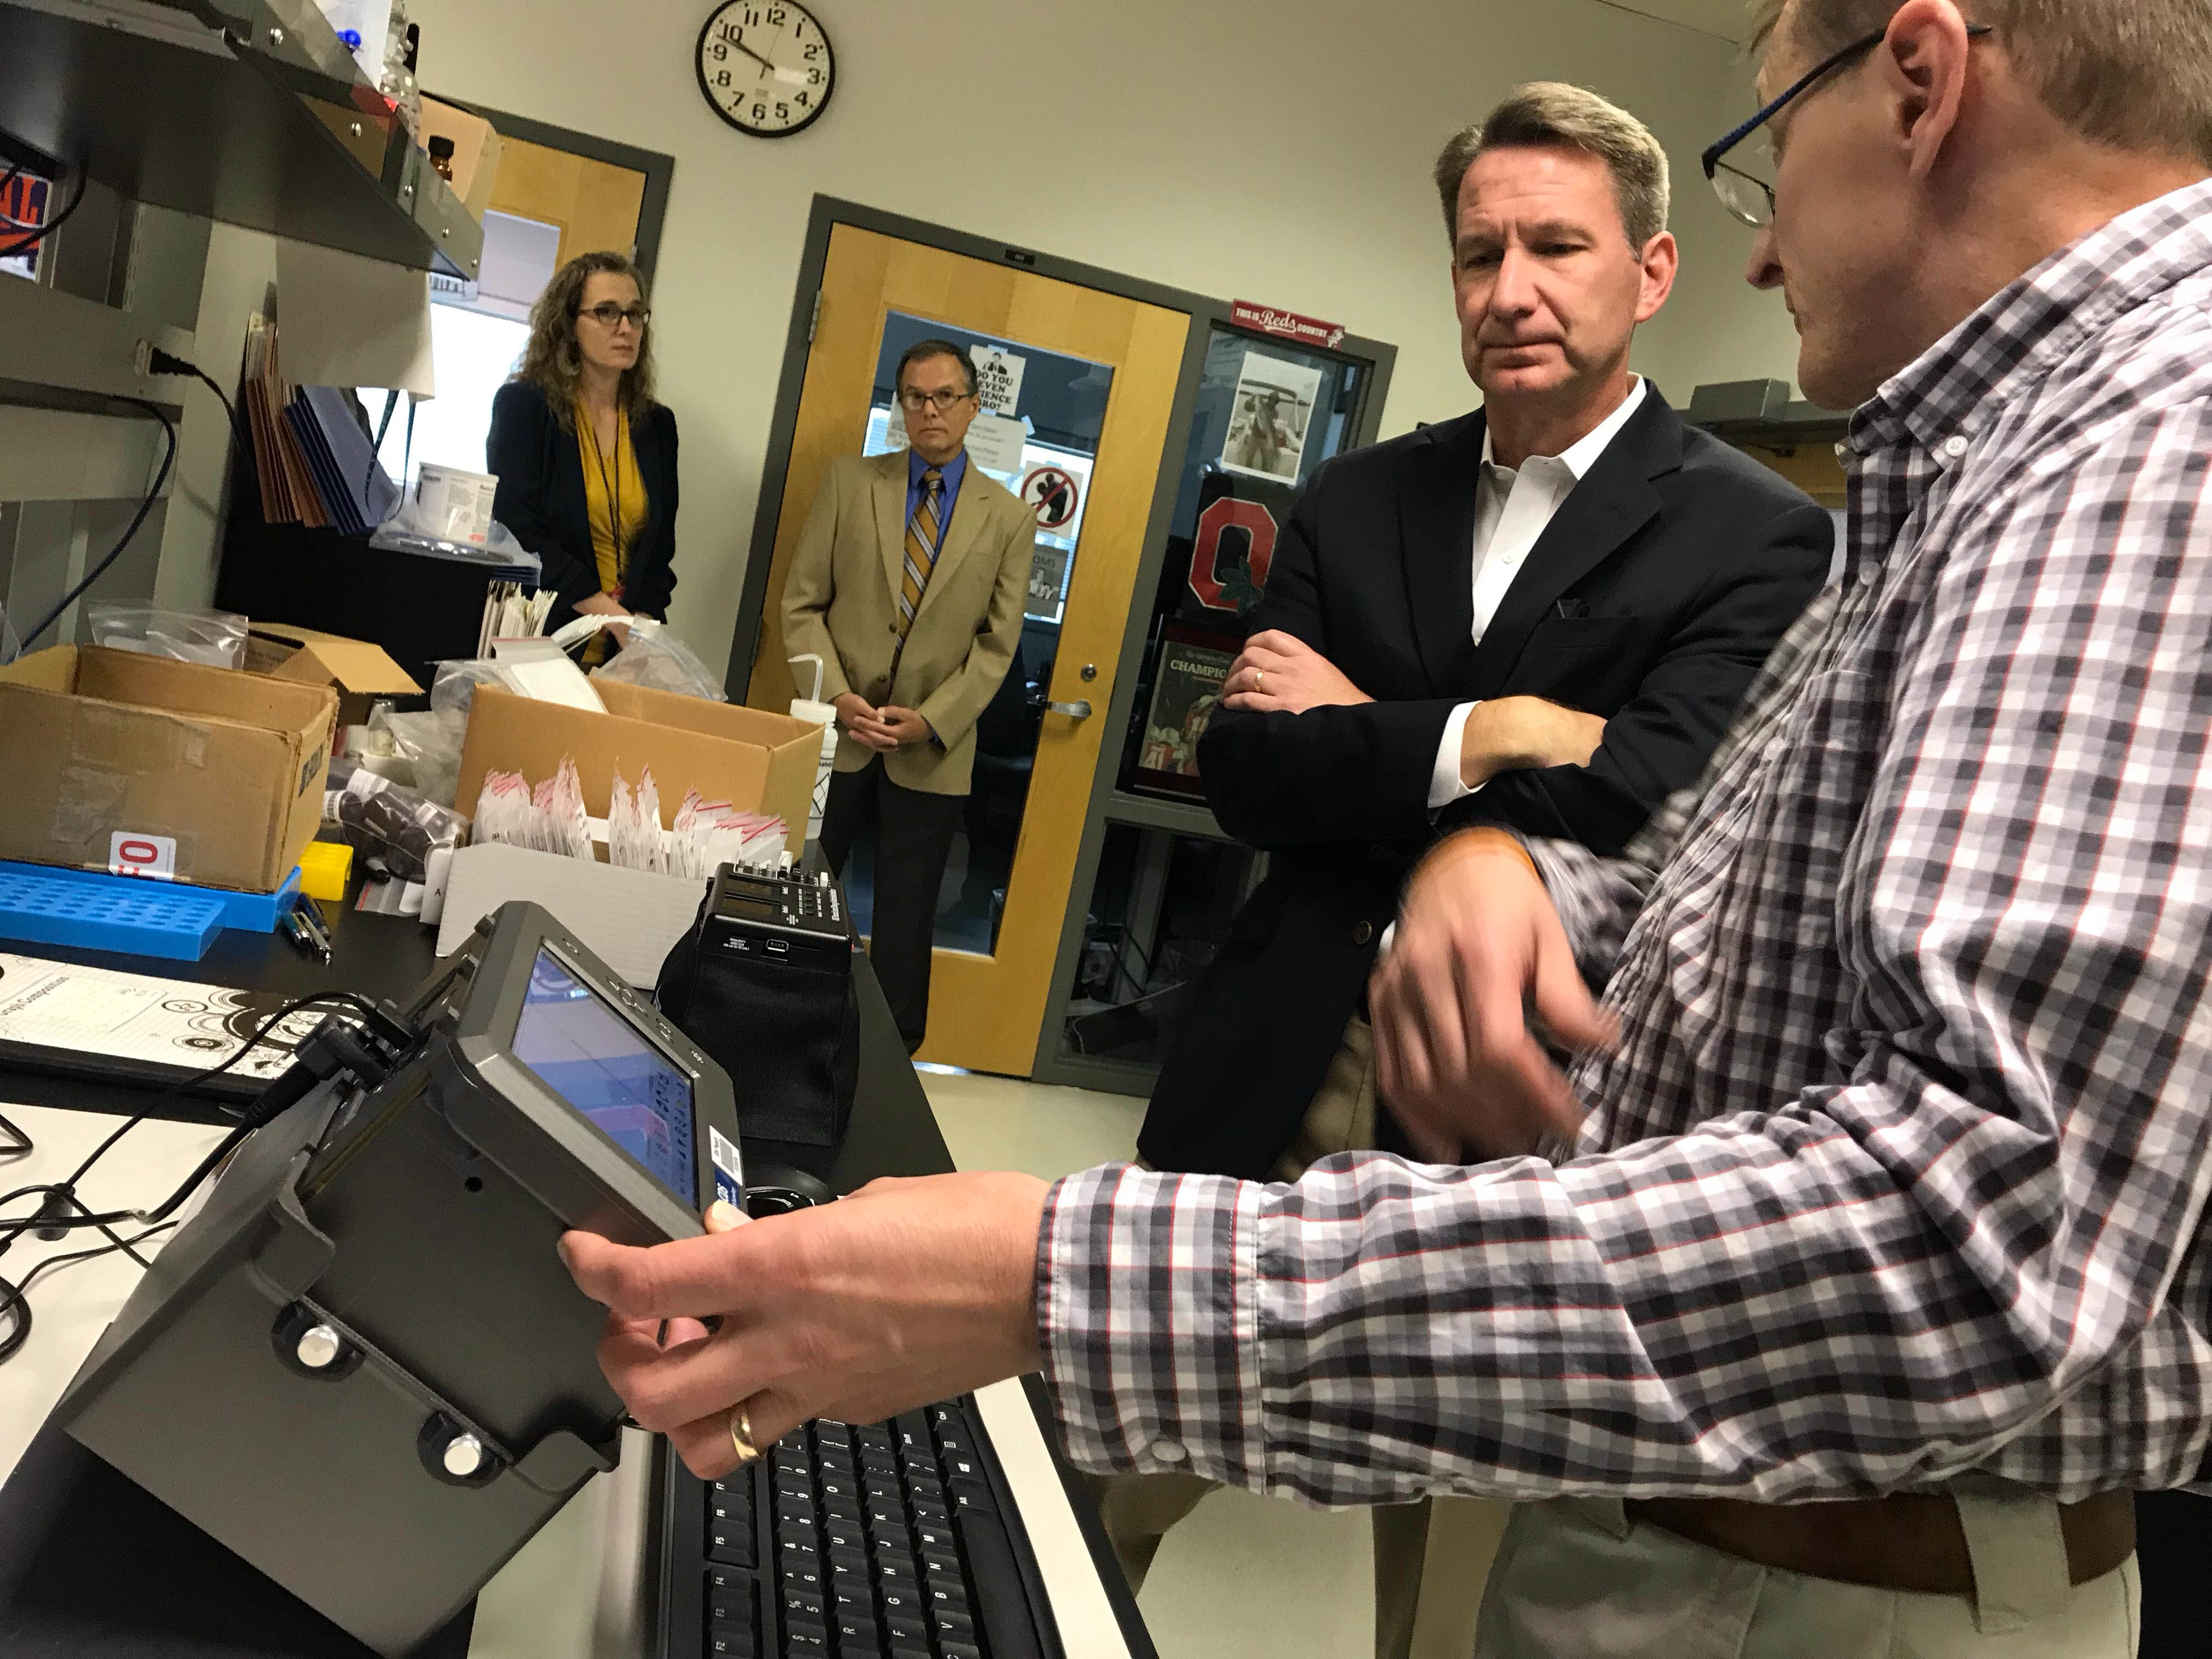 Acting FDA Commissioner Ned Sharpless, M.D. takes a tour of the FDA’s Forensic Chemistry Center 